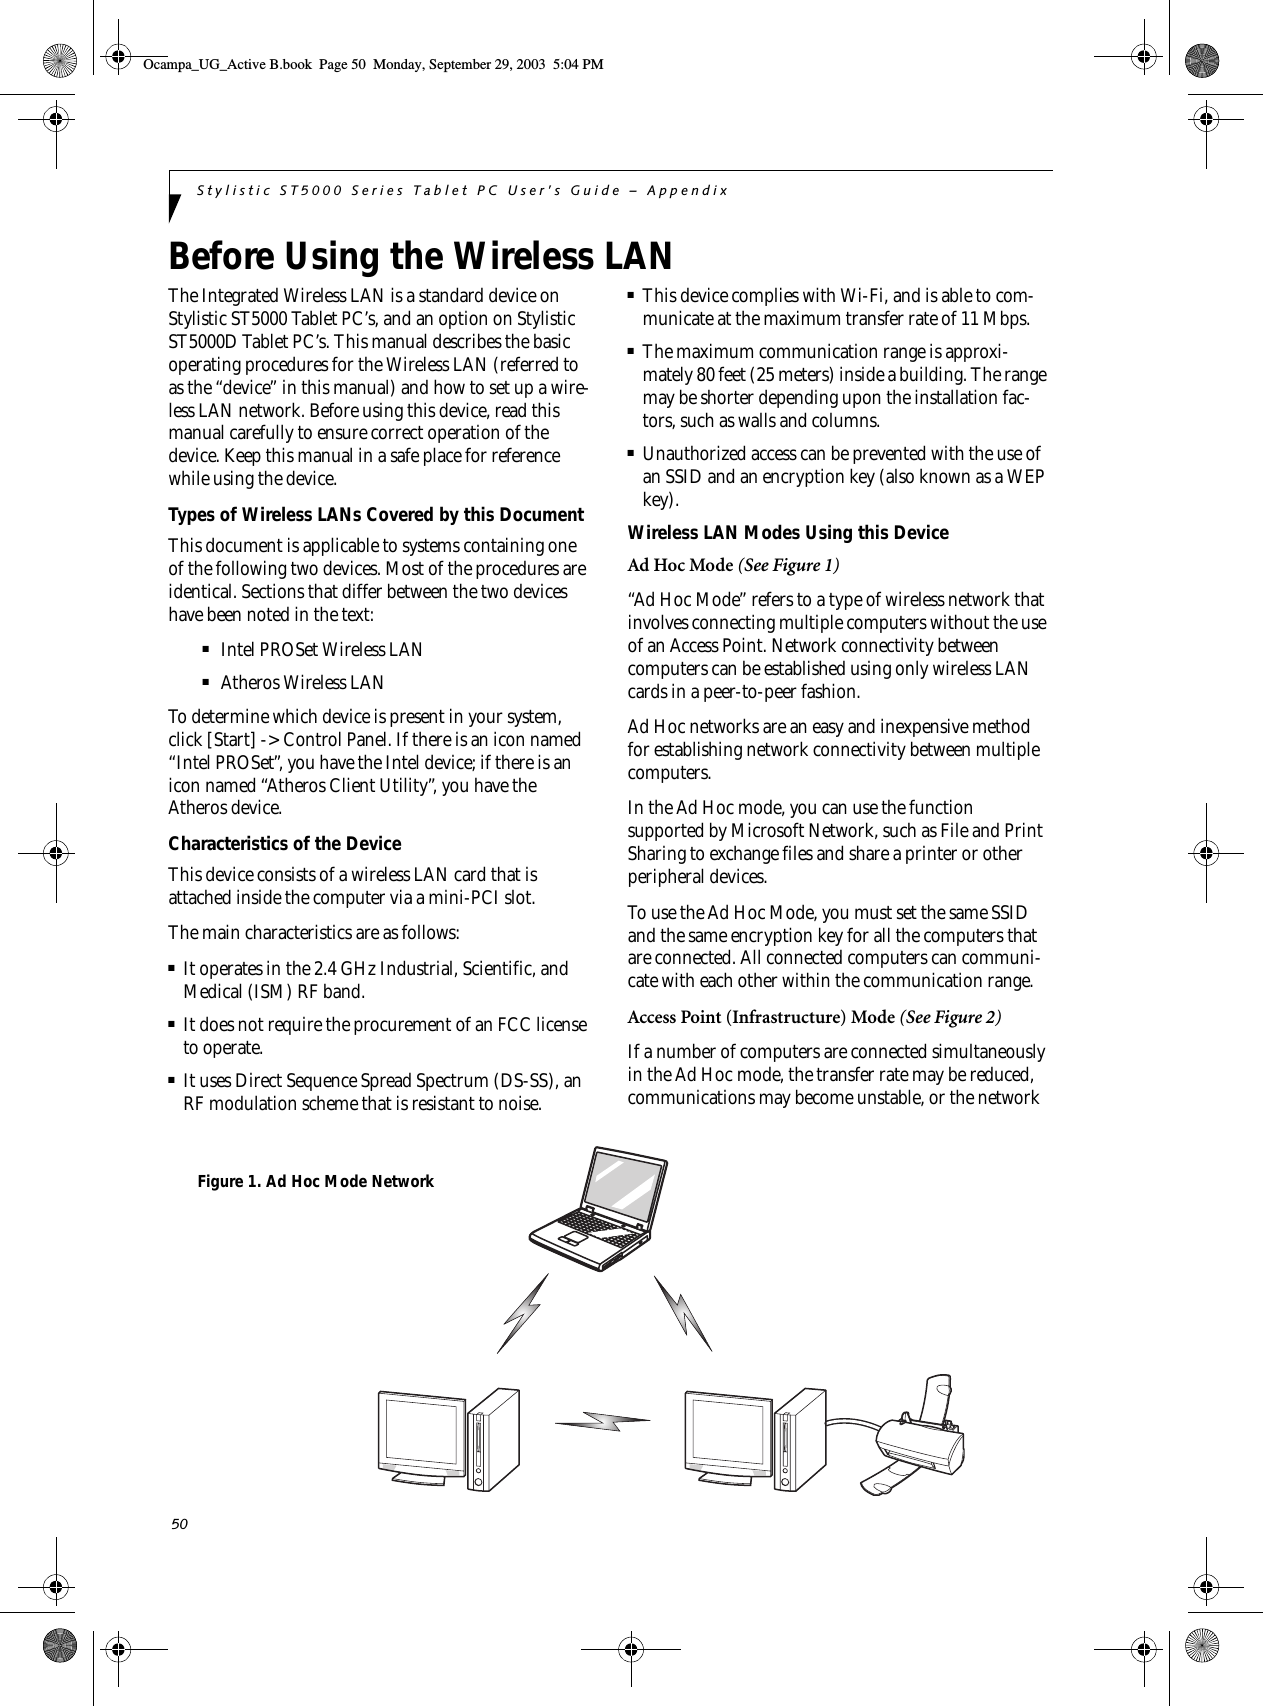 50Stylistic ST5000 Series Tablet PC User’s Guide – AppendixBefore Using the Wireless LAN The Integrated Wireless LAN is a standard device on Stylistic ST5000 Tablet PC’s, and an option on Stylistic ST5000D Tablet PC’s. This manual describes the basic operating procedures for the Wireless LAN (referred to as the “device” in this manual) and how to set up a wire-less LAN network. Before using this device, read this manual carefully to ensure correct operation of the device. Keep this manual in a safe place for reference while using the device.Types of Wireless LANs Covered by this DocumentThis document is applicable to systems containing one of the following two devices. Most of the procedures are identical. Sections that differ between the two devices have been noted in the text:■Intel PROSet Wireless LAN■Atheros Wireless LANTo determine which device is present in your system, click [Start] -&gt; Control Panel. If there is an icon named “Intel PROSet”, you have the Intel device; if there is an icon named “Atheros Client Utility”, you have the Atheros device. Characteristics of the DeviceThis device consists of a wireless LAN card that is attached inside the computer via a mini-PCI slot.The main characteristics are as follows:■It operates in the 2.4 GHz Industrial, Scientific, and Medical (ISM) RF band.■It does not require the procurement of an FCC license to operate.■It uses Direct Sequence Spread Spectrum (DS-SS), an RF modulation scheme that is resistant to noise.■This device complies with Wi-Fi, and is able to com-municate at the maximum transfer rate of 11 Mbps.■The maximum communication range is approxi-mately 80 feet (25 meters) inside a building. The range may be shorter depending upon the installation fac-tors, such as walls and columns.■Unauthorized access can be prevented with the use of an SSID and an encryption key (also known as a WEP key).Wireless LAN Modes Using this DeviceAd Hoc Mode (See Figure 1)“Ad Hoc Mode” refers to a type of wireless network that involves connecting multiple computers without the use of an Access Point. Network connectivity between computers can be established using only wireless LAN cards in a peer-to-peer fashion.Ad Hoc networks are an easy and inexpensive method for establishing network connectivity between multiple computers.In the Ad Hoc mode, you can use the function supported by Microsoft Network, such as File and Print Sharing to exchange files and share a printer or other peripheral devices.To use the Ad Hoc Mode, you must set the same SSID and the same encryption key for all the computers that are connected. All connected computers can communi-cate with each other within the communication range. Access Point (Infrastructure) Mode (See Figure 2)If a number of computers are connected simultaneously in the Ad Hoc mode, the transfer rate may be reduced, communications may become unstable, or the network Figure 1. Ad Hoc Mode NetworkOcampa_UG_Active B.book  Page 50  Monday, September 29, 2003  5:04 PM